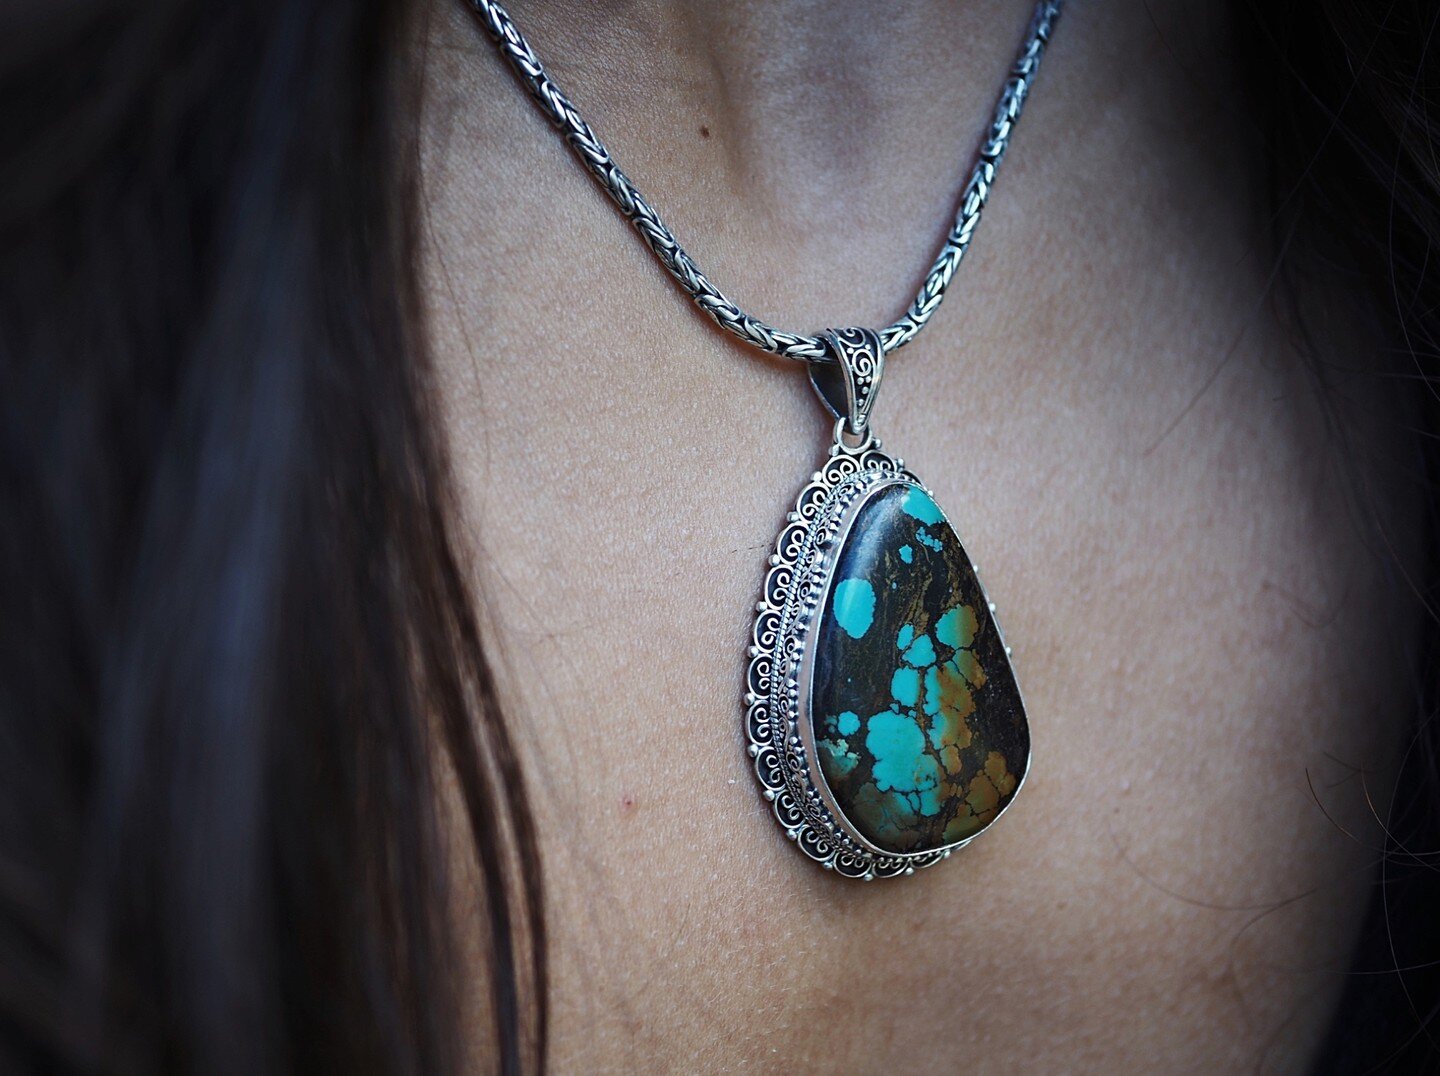 Turquoise is such a magic stone - said to be a bridge between the ethereal and physical planes. ✨ Plus, it's so divine to look at. 

Check out the incredible turquoise pieces I have online - Search by stone and find your favourite 🌚

#turquoise #tur